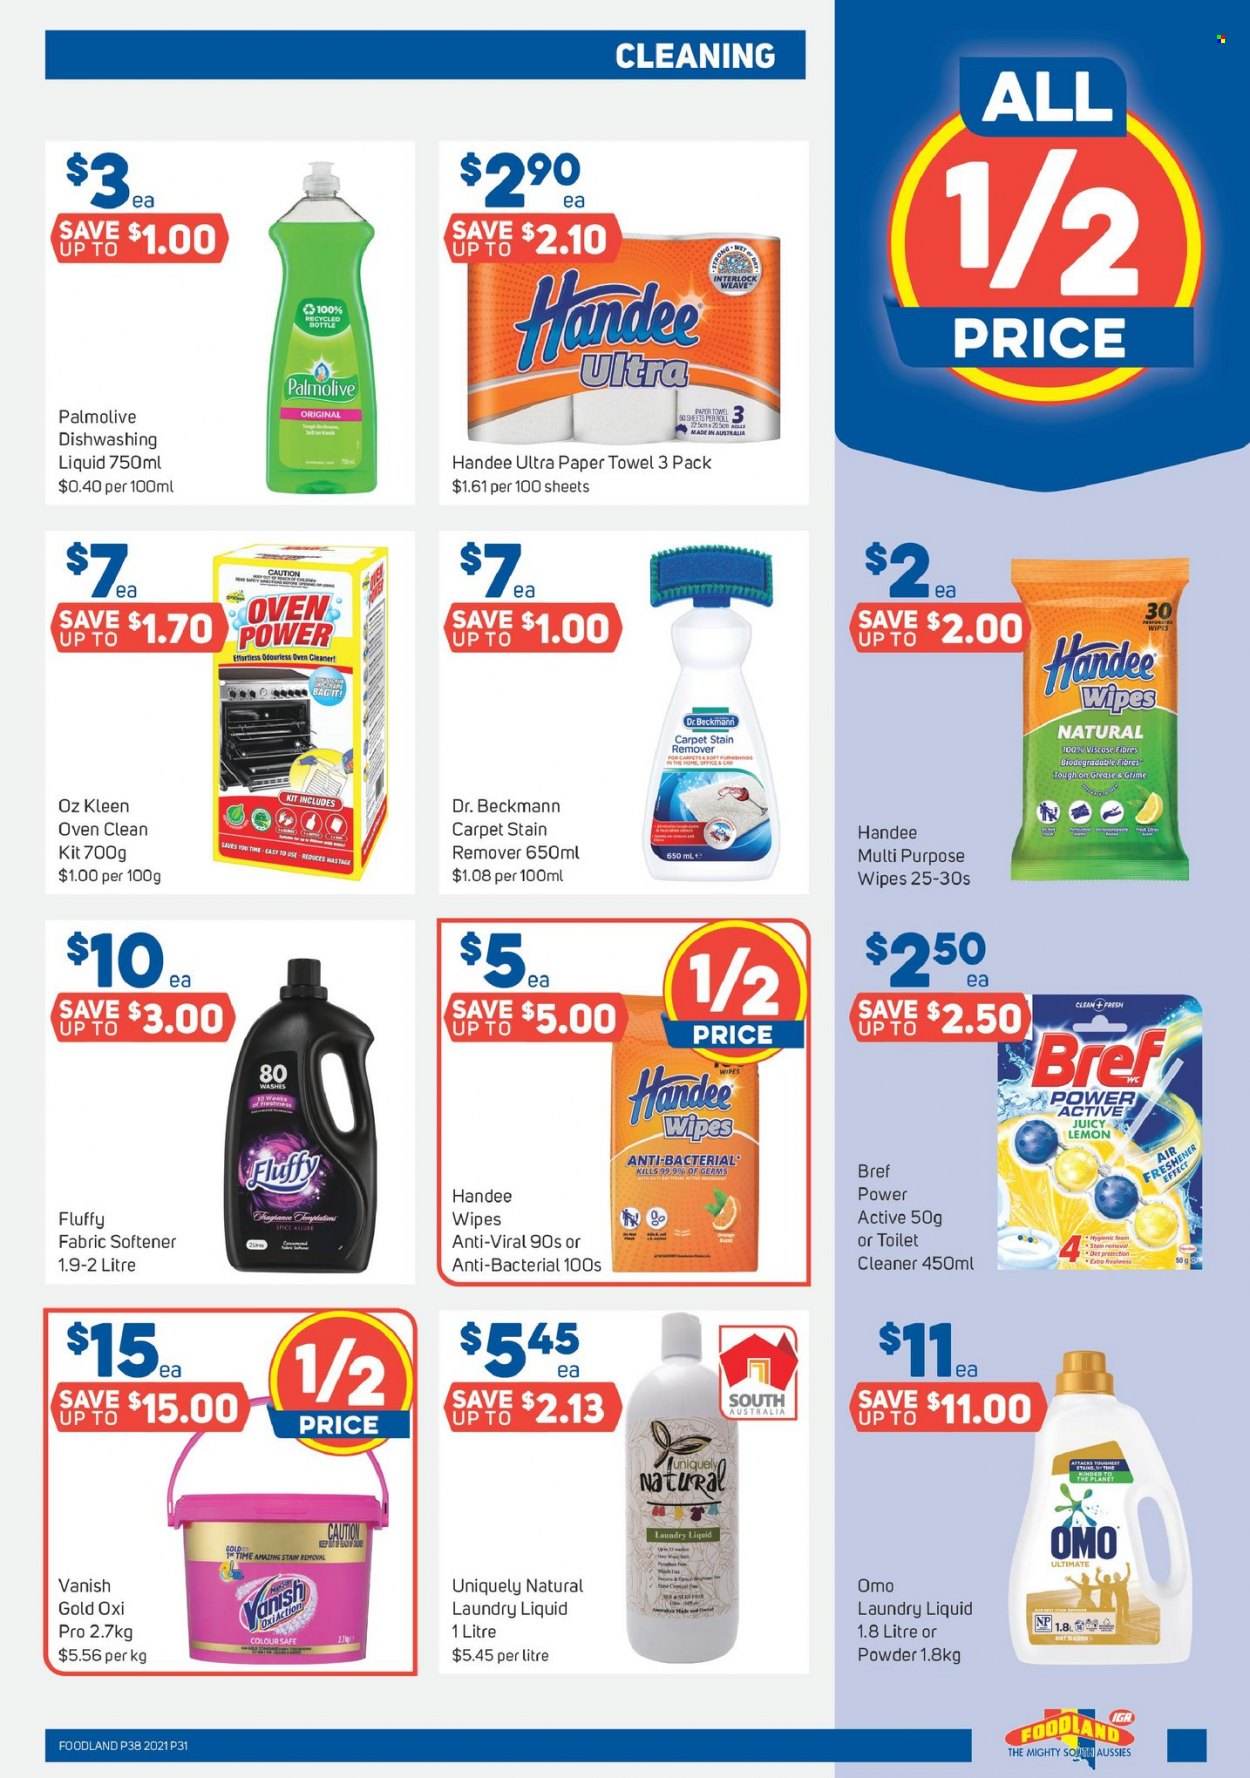 thumbnail - Foodland Catalogue - 15 Sep 2021 - 21 Sep 2021 - Sales products - wipes, Handee, paper towels, cleaner, stain remover, Vanish, fabric softener, Omo, laundry detergent, dishwashing liquid, Palmolive, bag. Page 31.